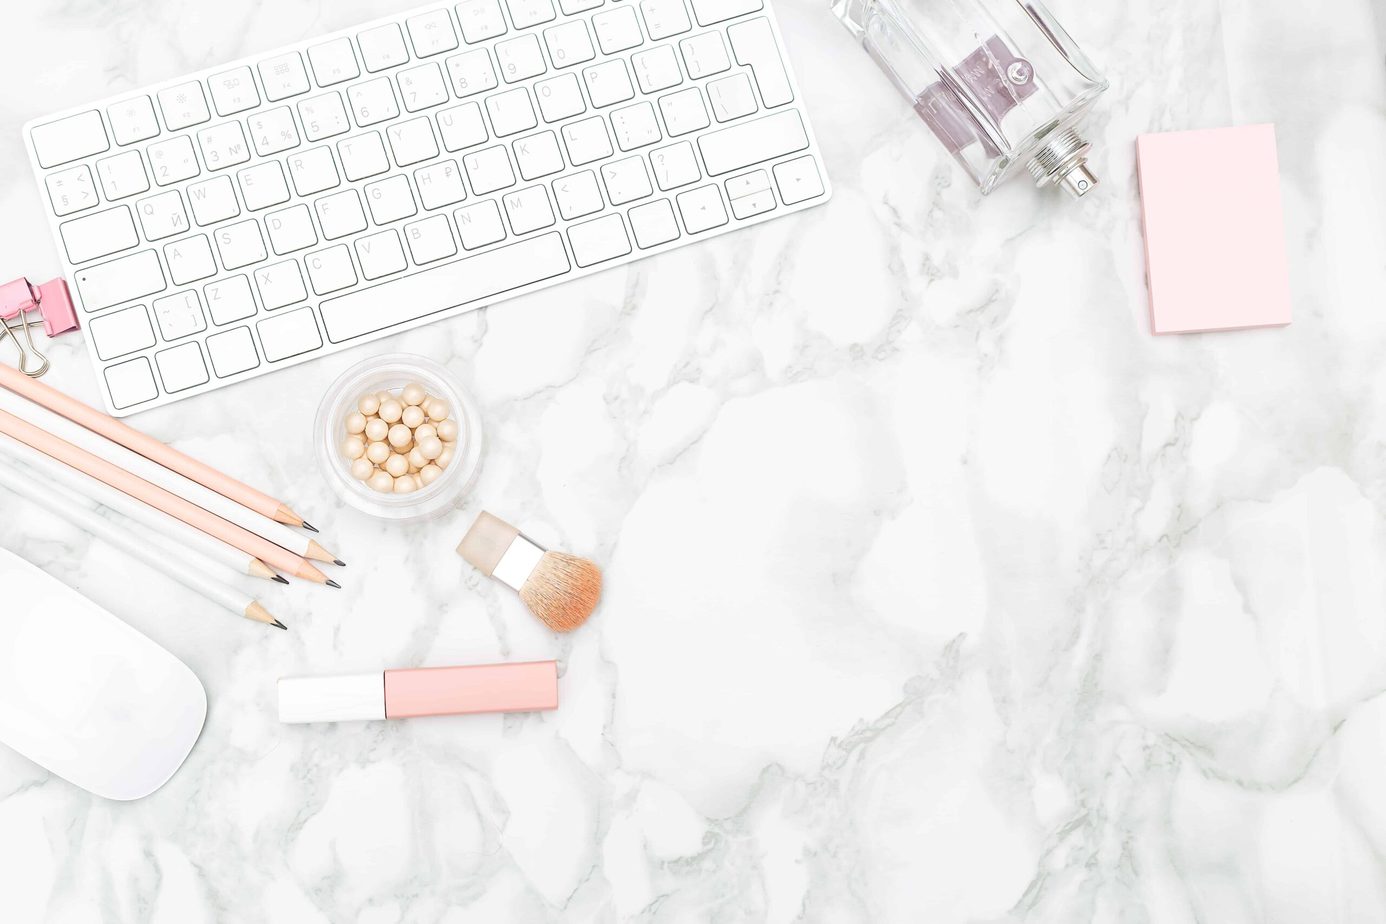 Feminine desktop with stationery and perfume. Copy space